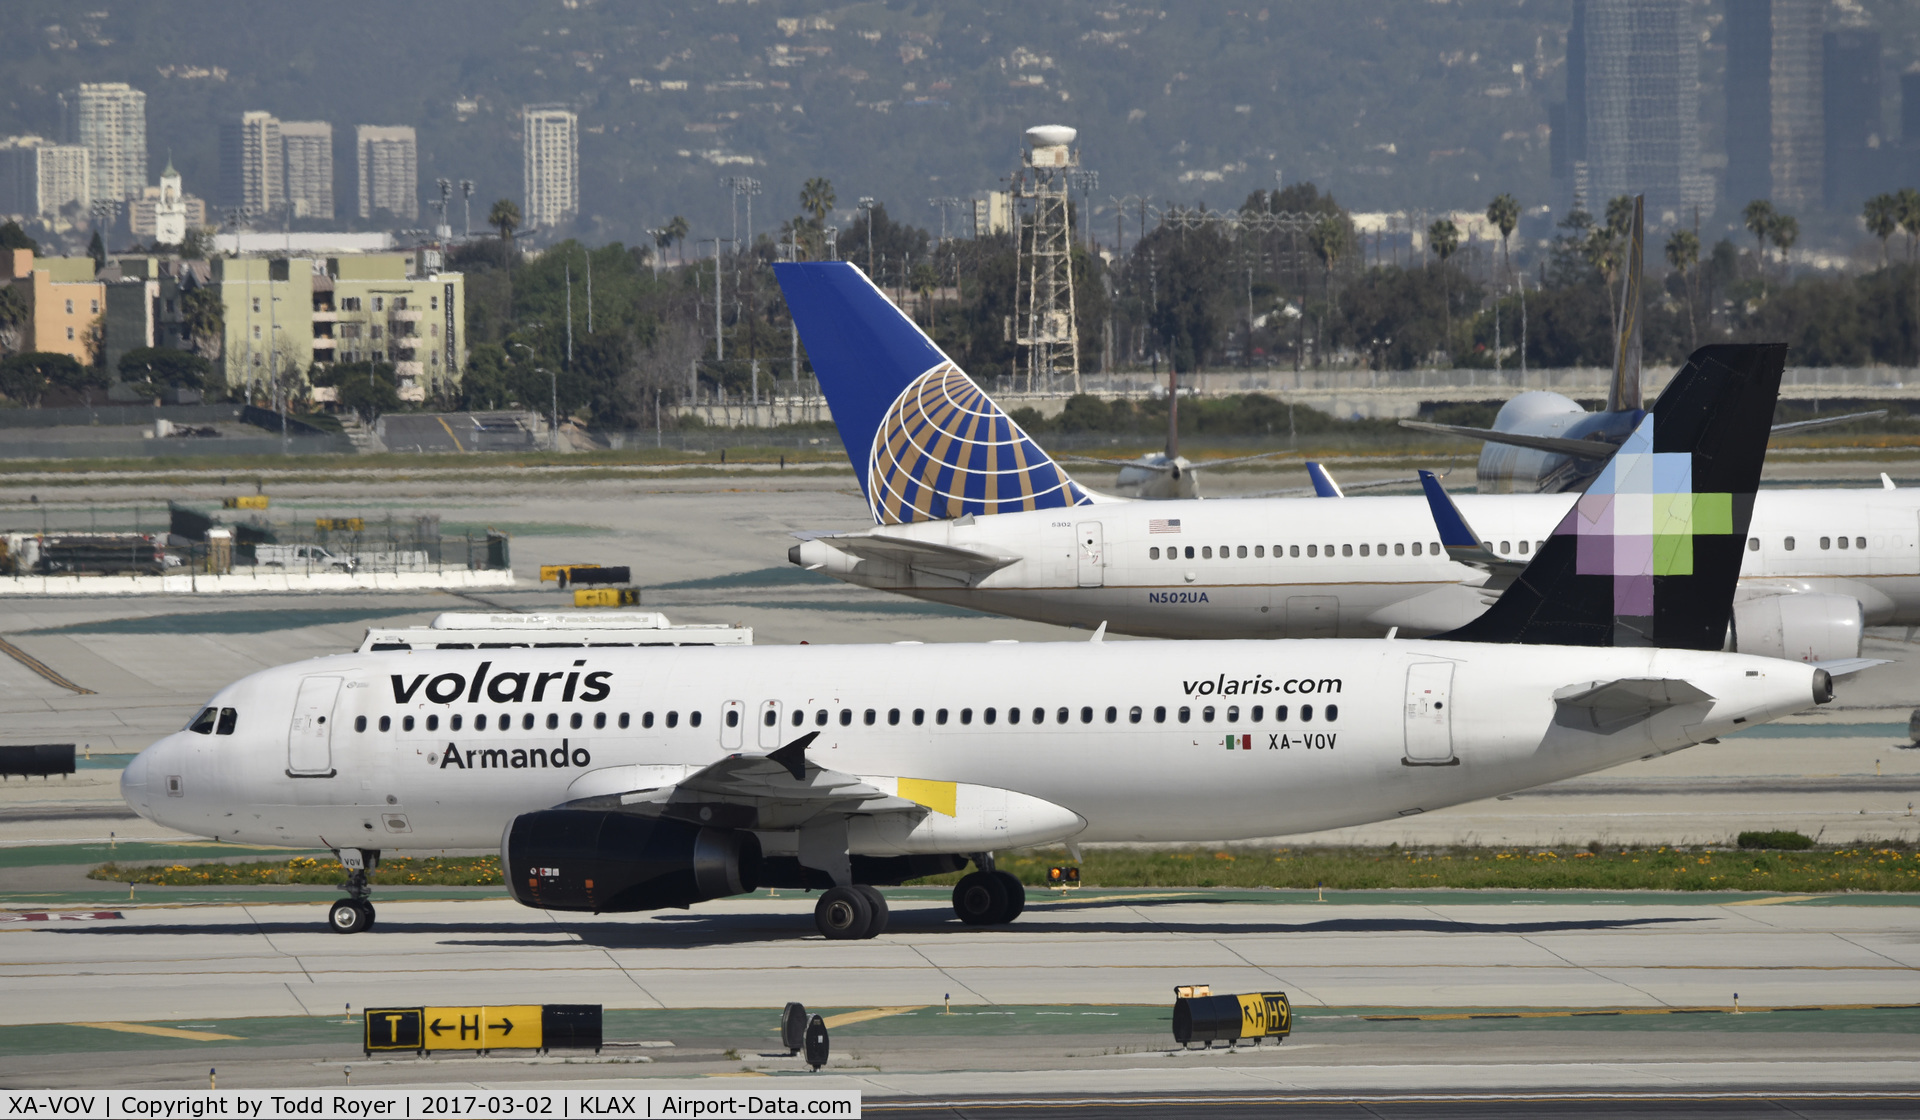 XA-VOV, 2088 Airbus A320-232 C/N 3524, Arrived at LAX on 25L